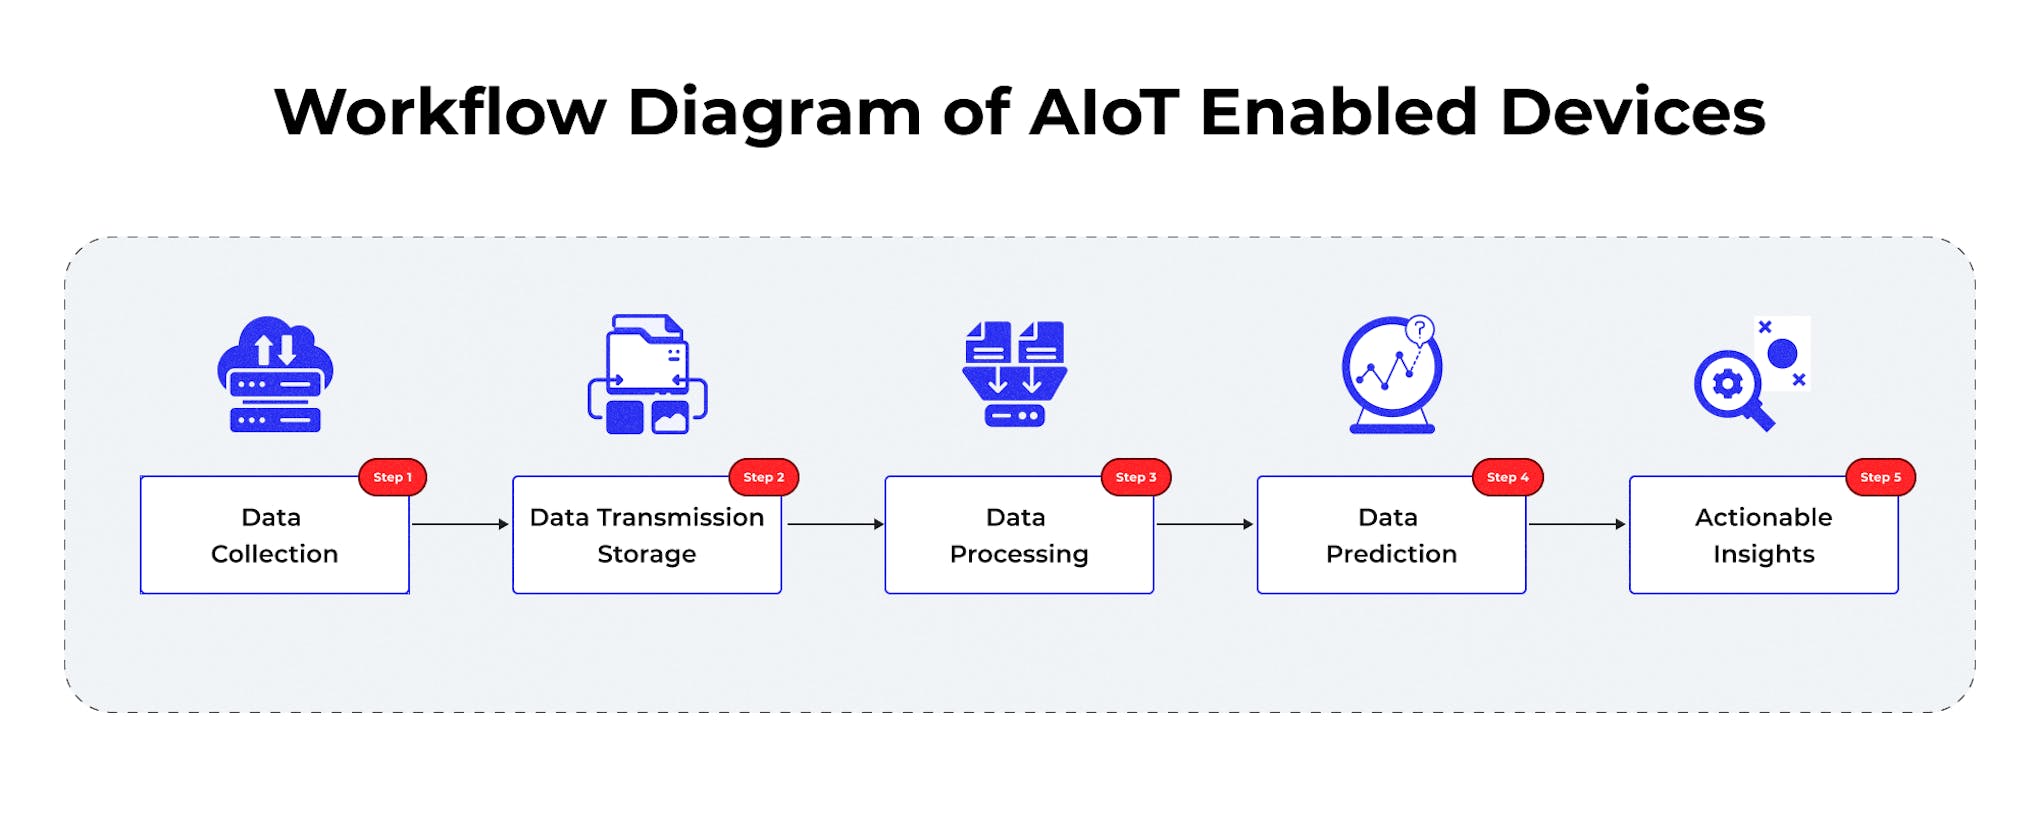 How Does AIoT Work?